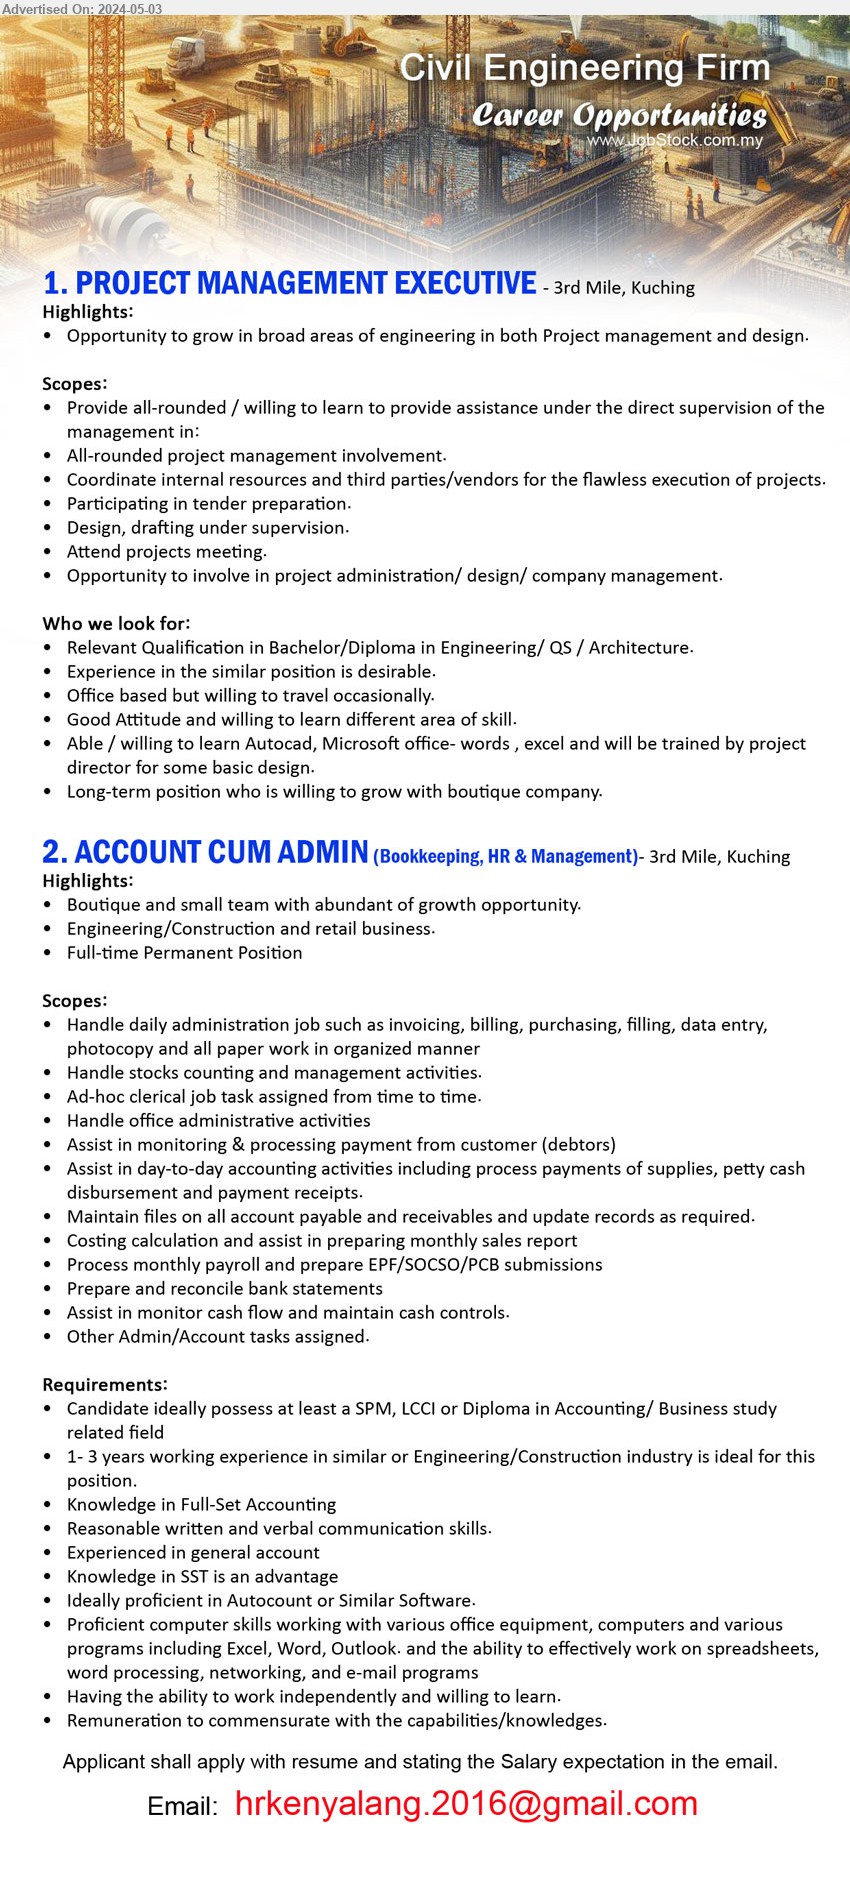 ADVERTISER (Civil Engineering Firm) - 1. PROJECT MANAGEMENT EXECUTIVE (Kuching), Bachelor/Diploma in Engineering/ QS / Architecture, Experience in the similar position is desirable.,...
2. ACCOUNT CUM ADMIN (Bookkeeping, HR & Management) (Kuching), SPM, LCCI or Diploma in Accounting/ Business study, 1-3 yrs. exp.,...
Email resume to ...
